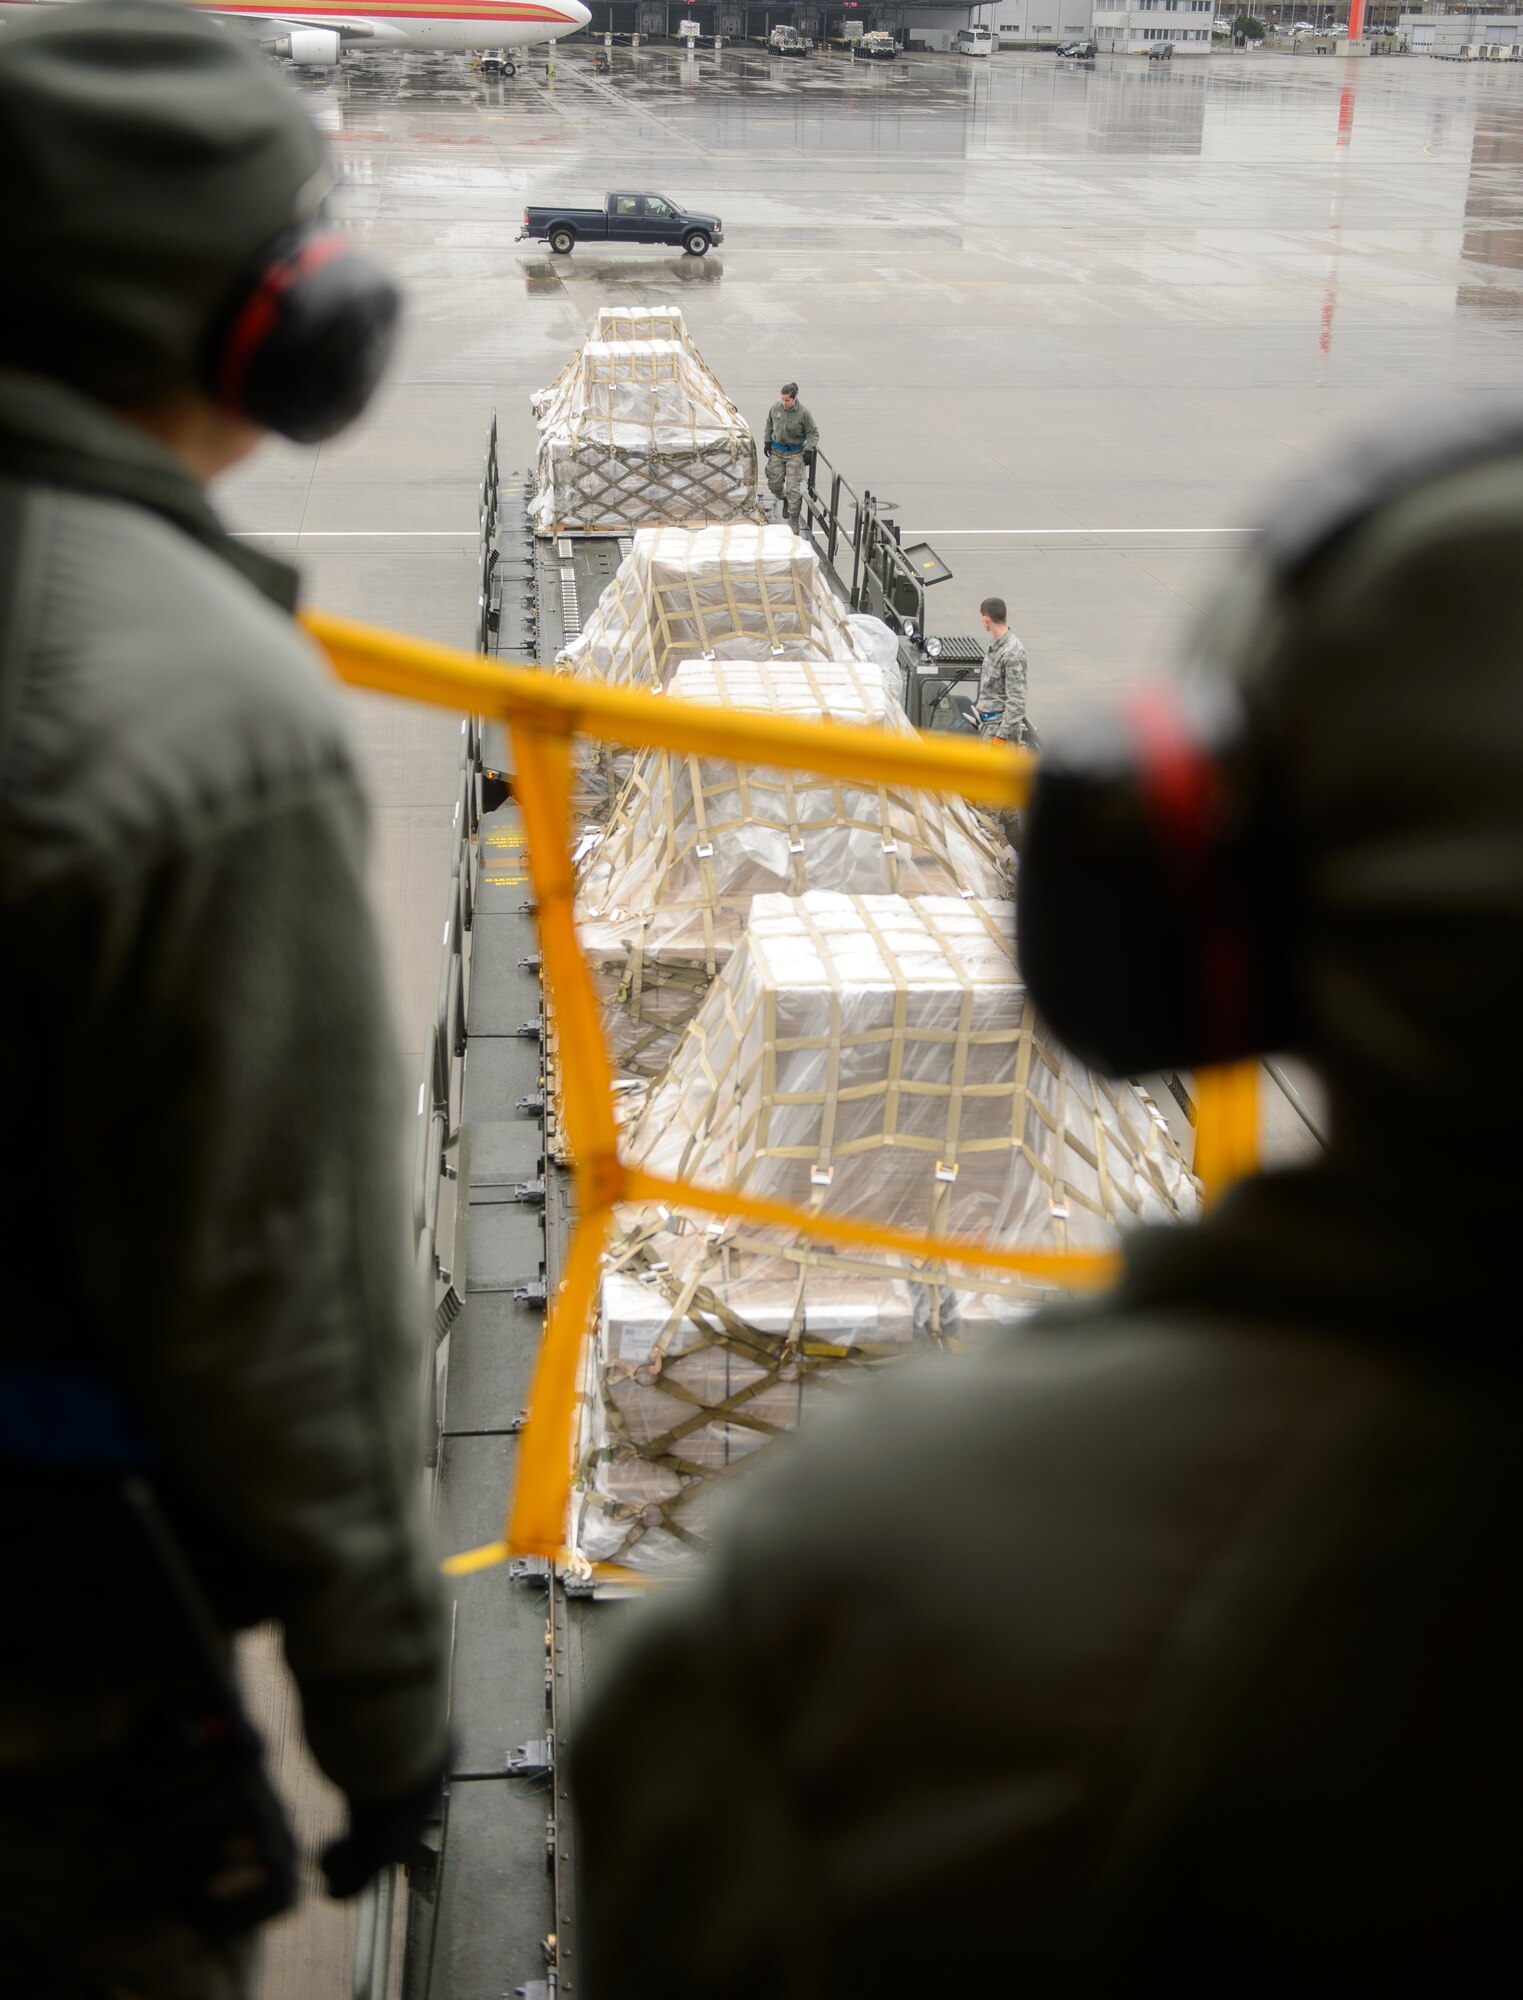 Ramp specialists from the 721st Aerial Port Squadron ensure cargo is transferred properly March 25, 2016, at Ramstein Air Base, Germany. A team of Airmen from the Air Force Reserve and active duty 721st APS ensured more than 40 pallets of food were safely off-loaded and transferred in order to reach their final destination in Afghanistan. (U.S. Air Force photo/Staff Sgt. Armando A. Schwier-Morales)